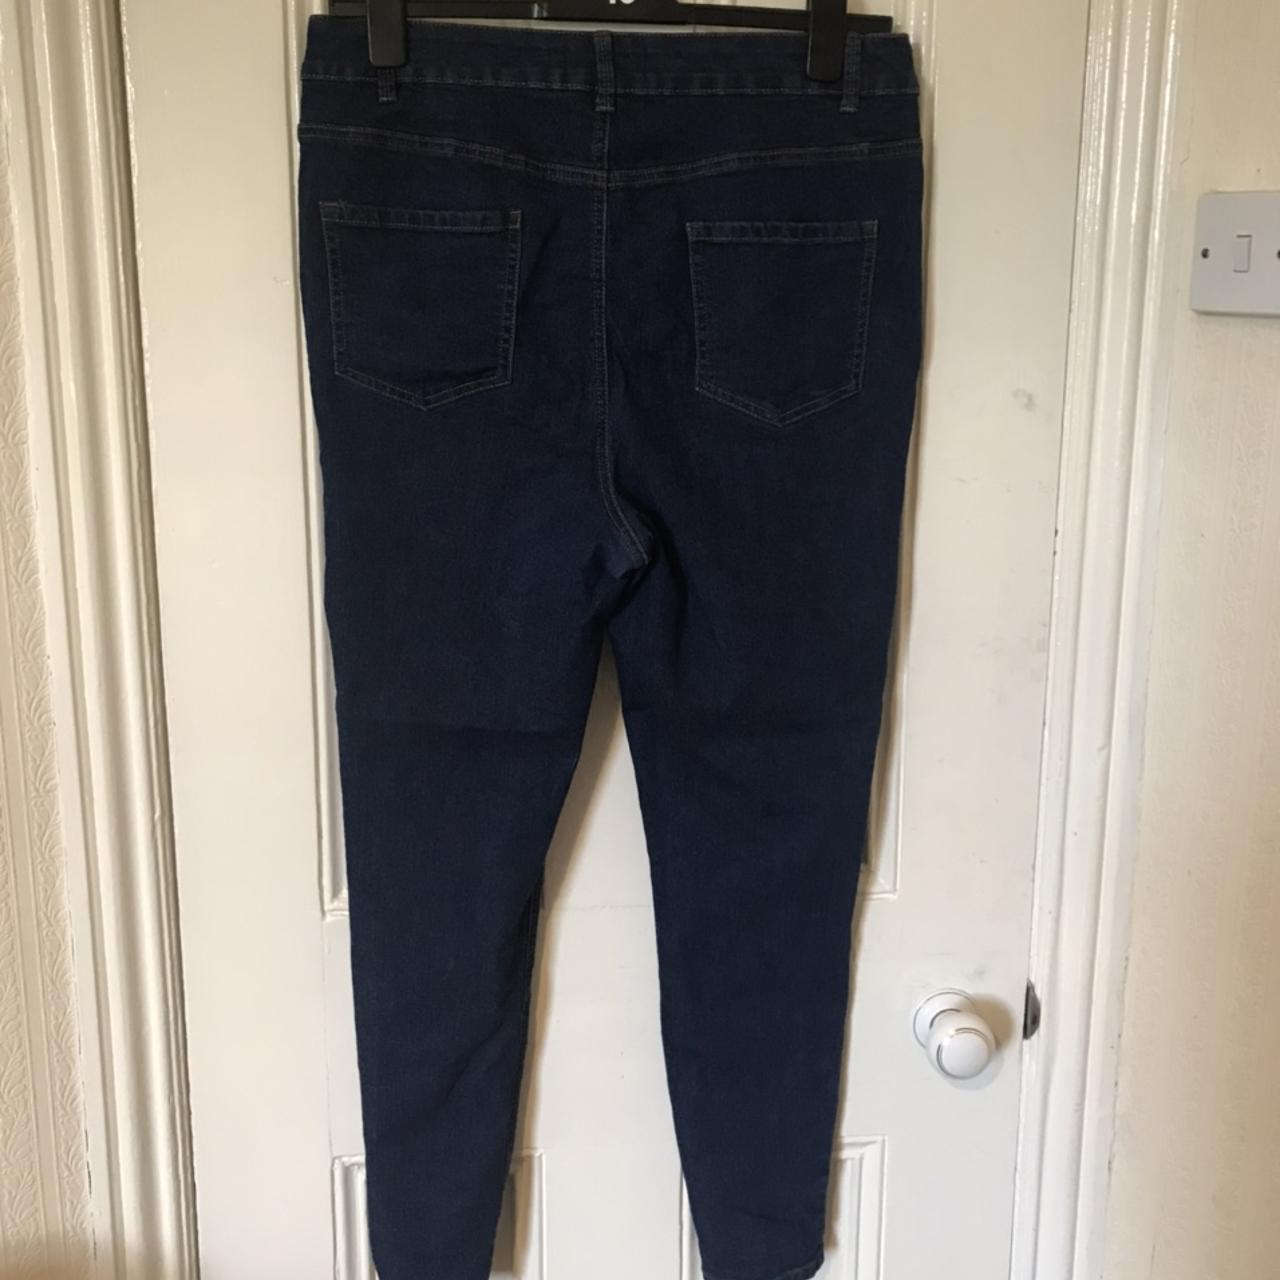 New Look Navy Skinny Denim Jeans. These button up... - Depop